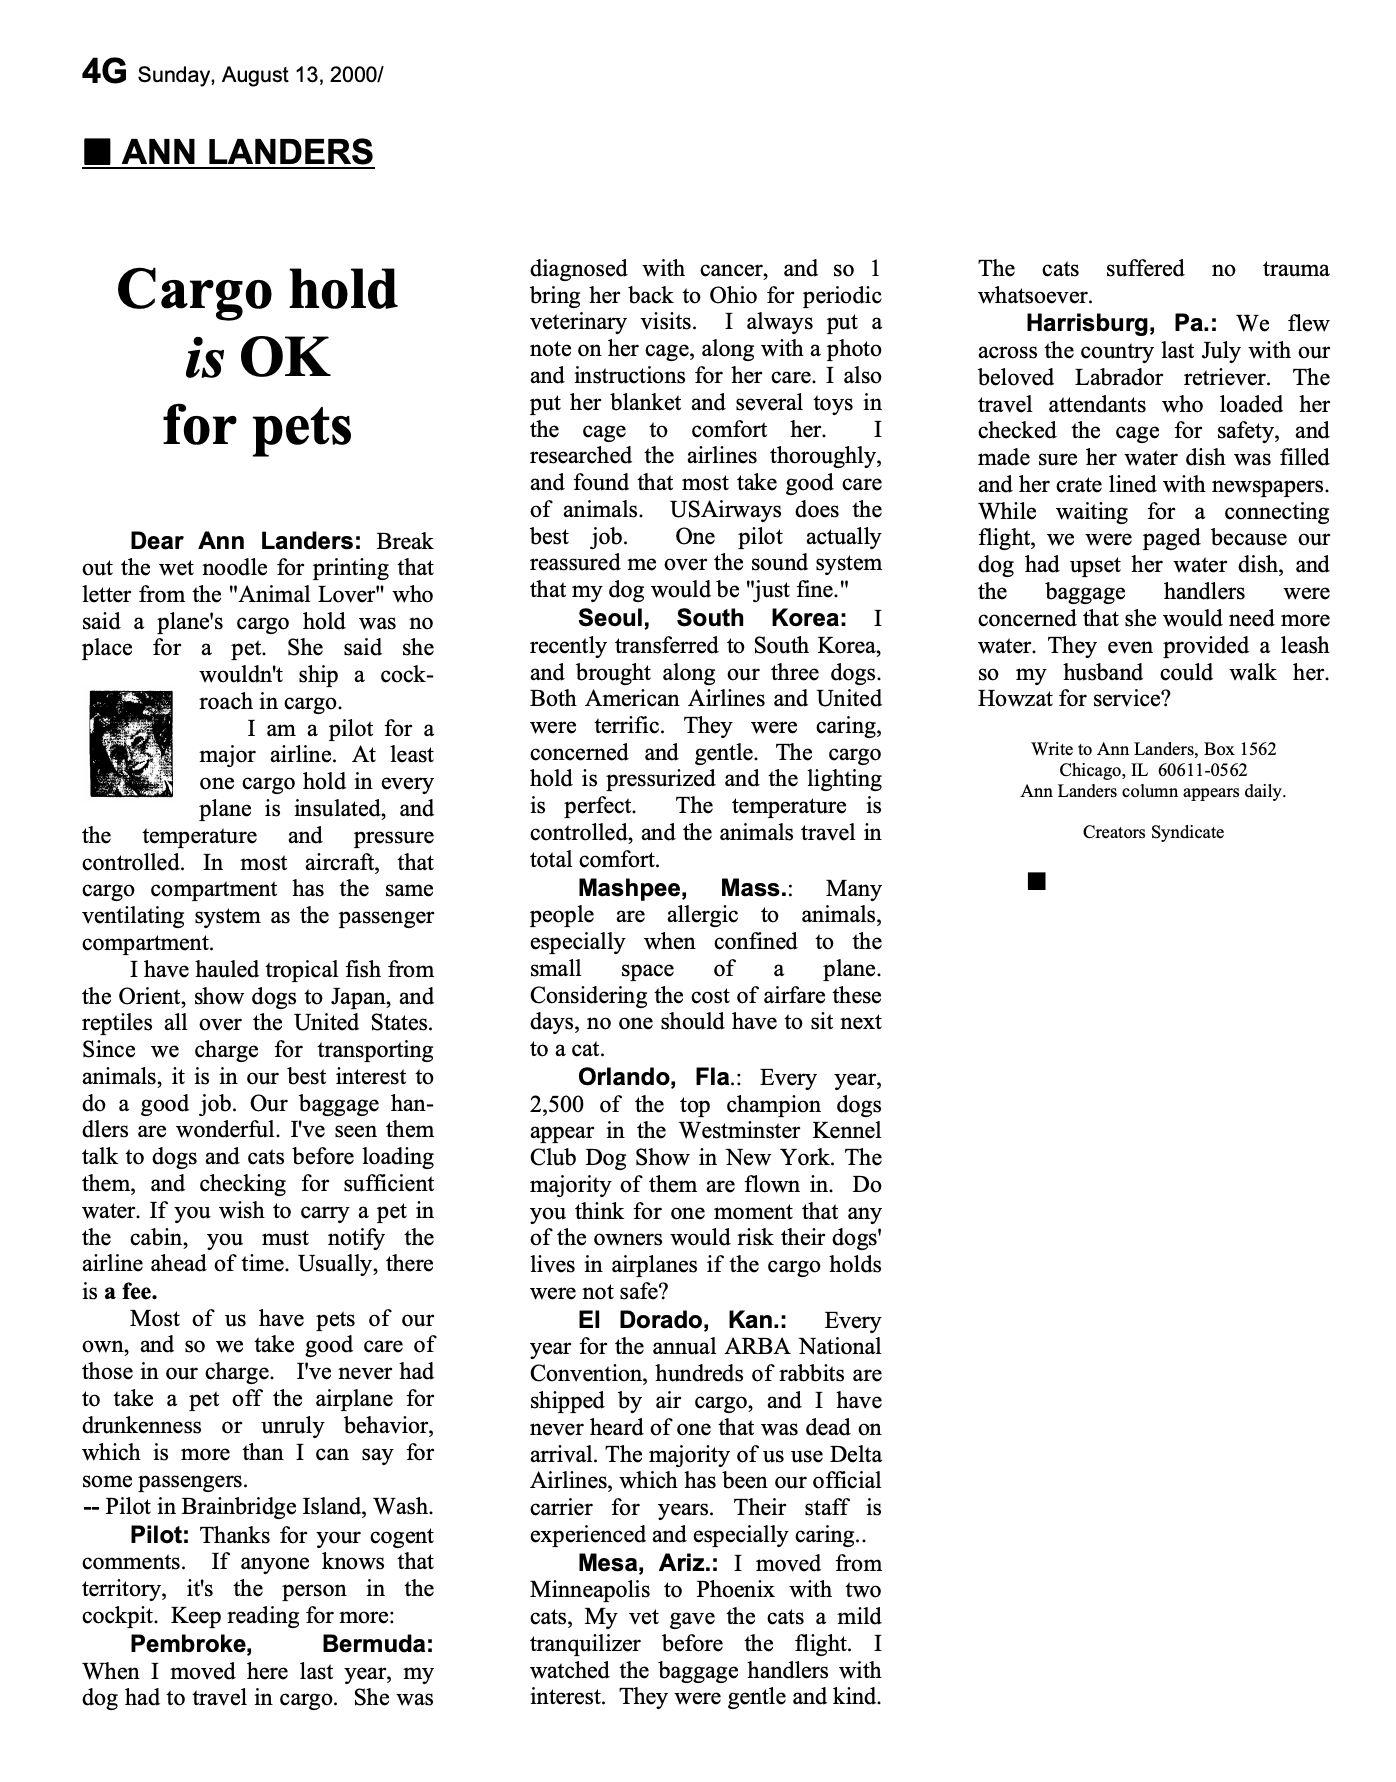 A newspaper article about cargo hold for pets.